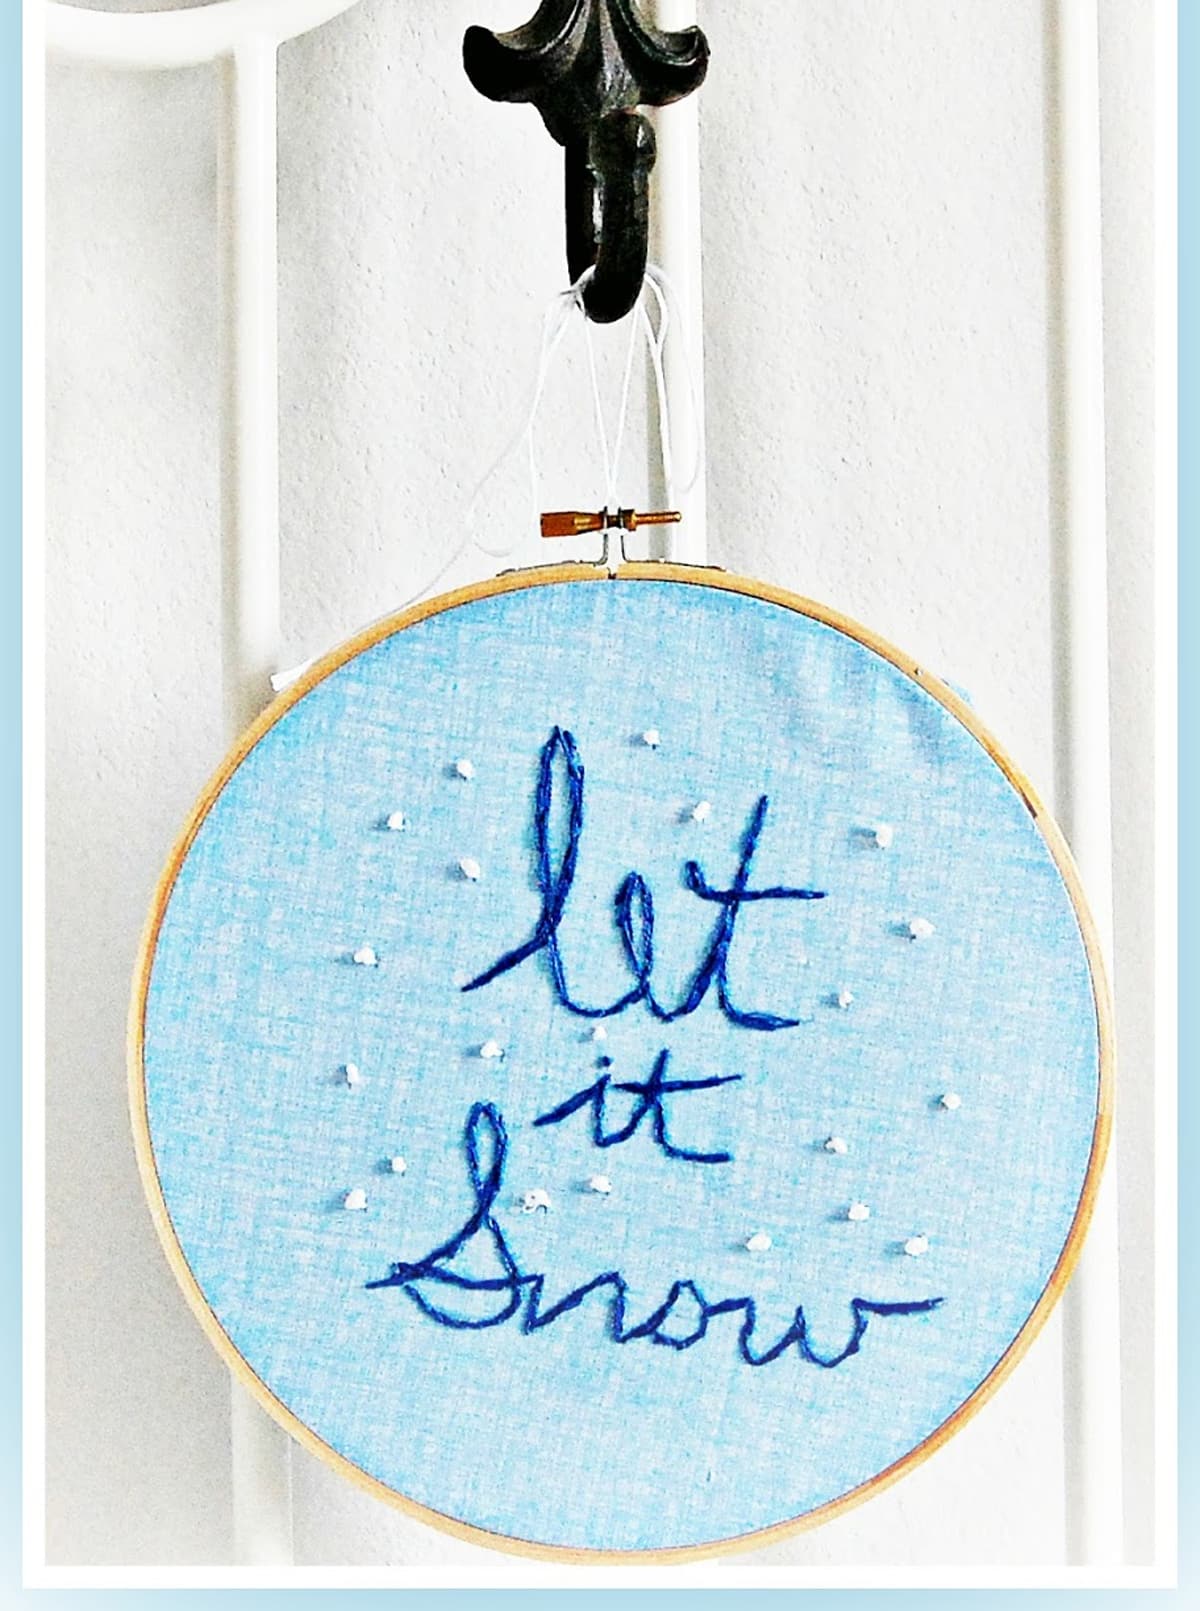 "Let it snow" embroidery frame hook